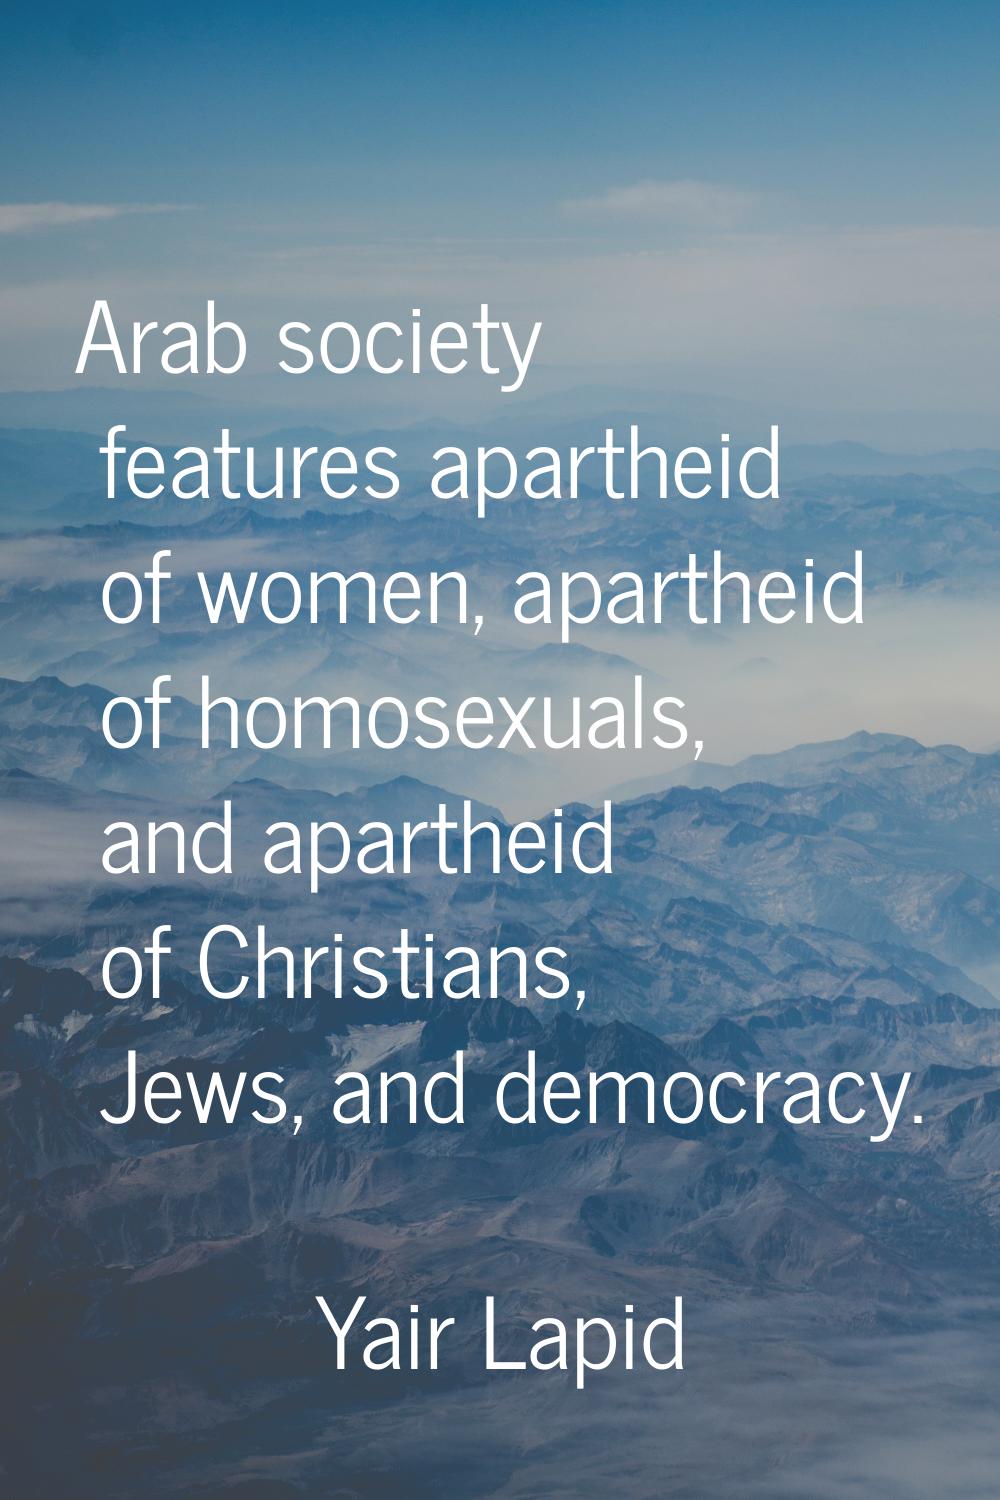 Arab society features apartheid of women, apartheid of homosexuals, and apartheid of Christians, Je